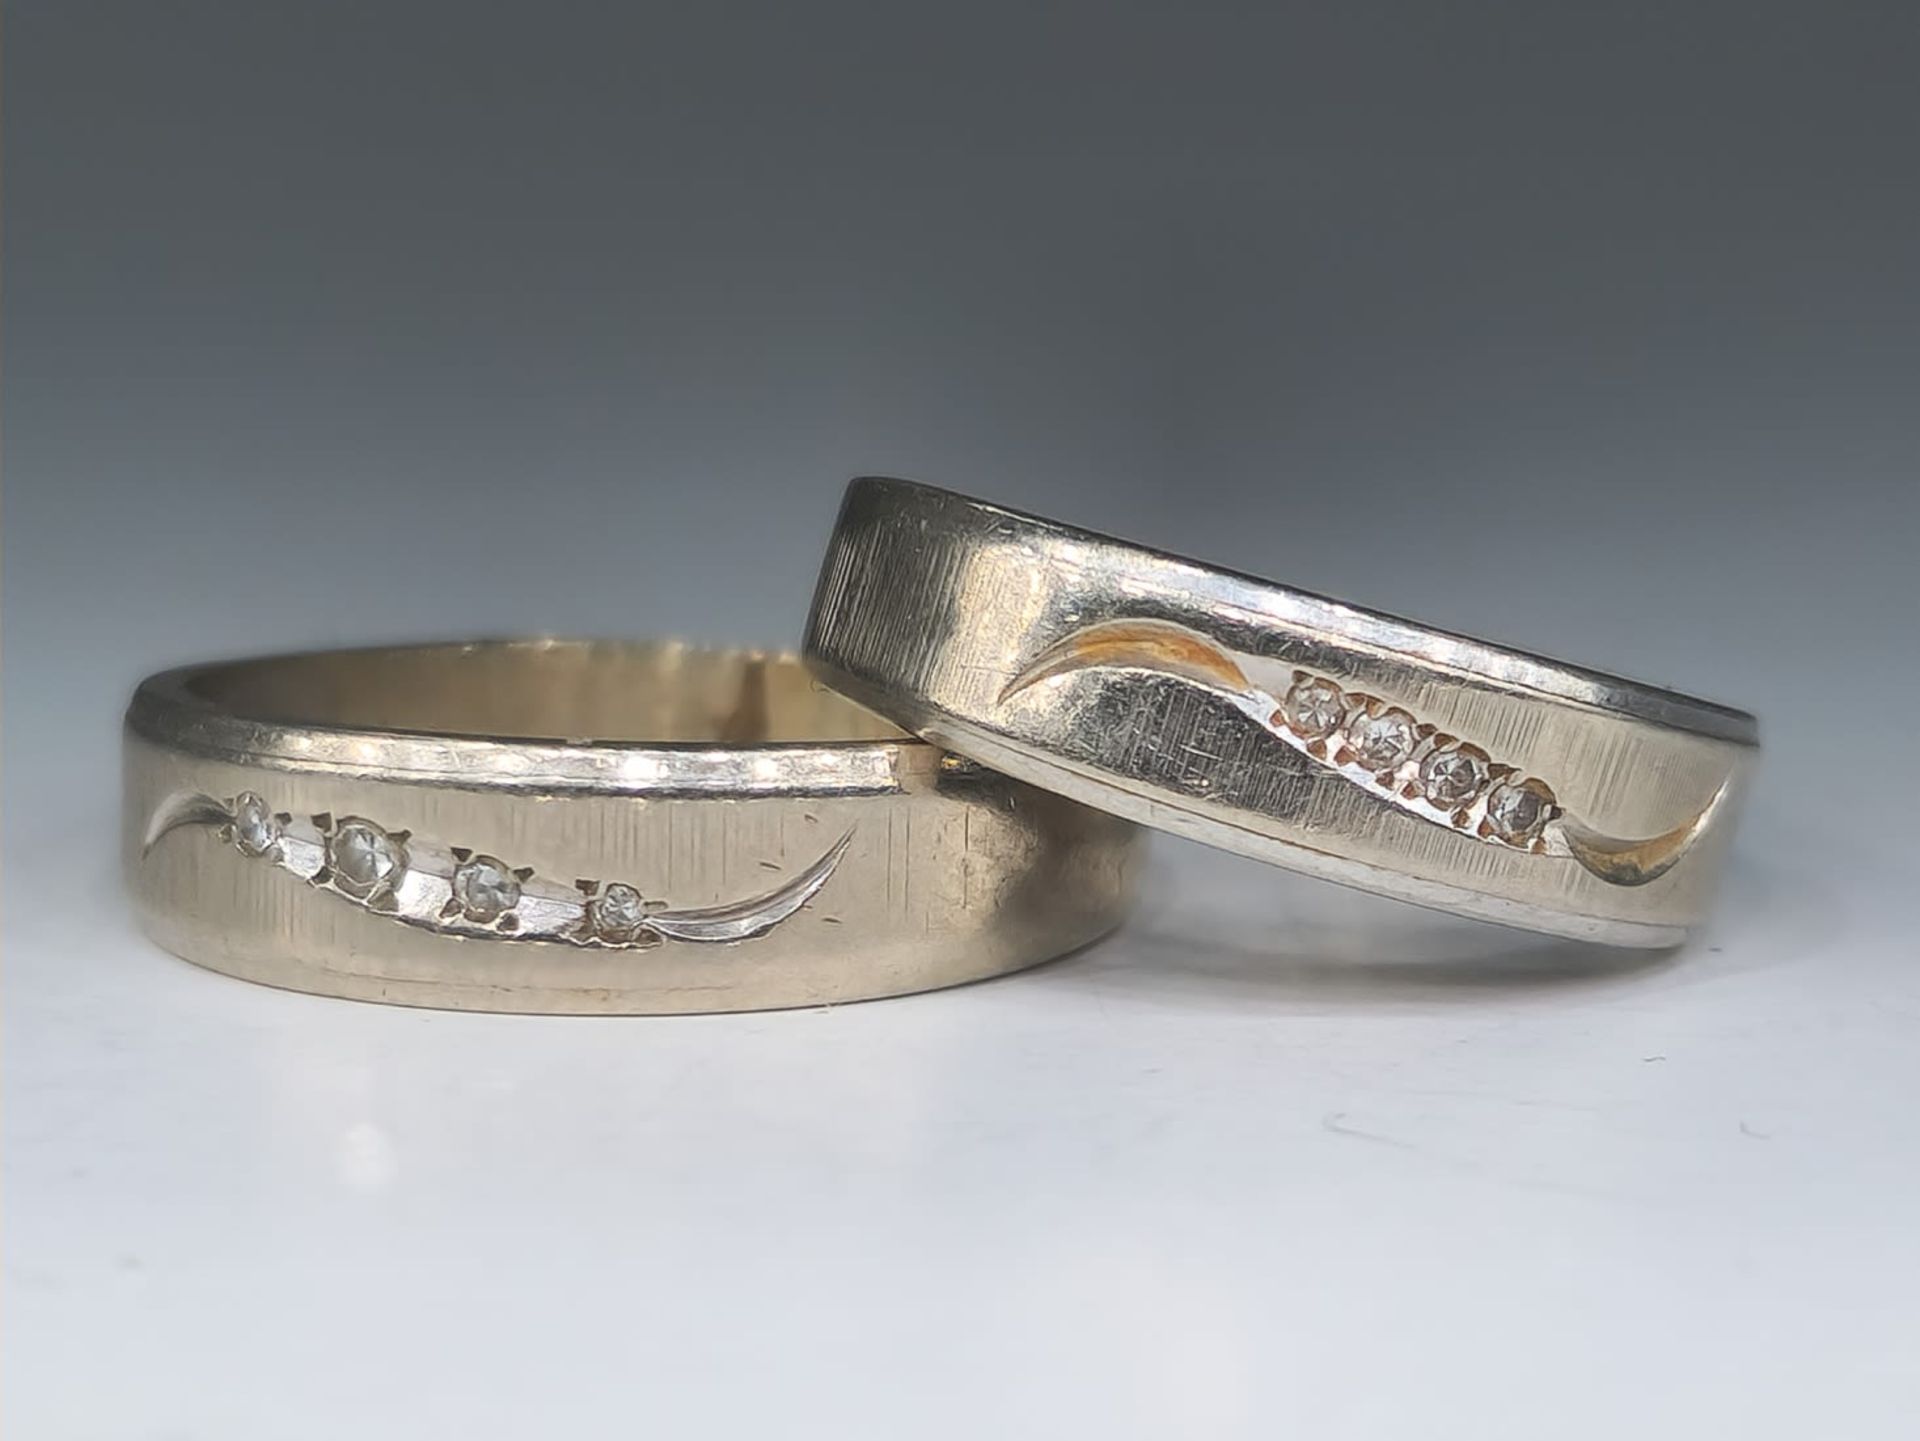 A set of 2 gold rings made of 14K white gold with small diamonds, with a total weight of